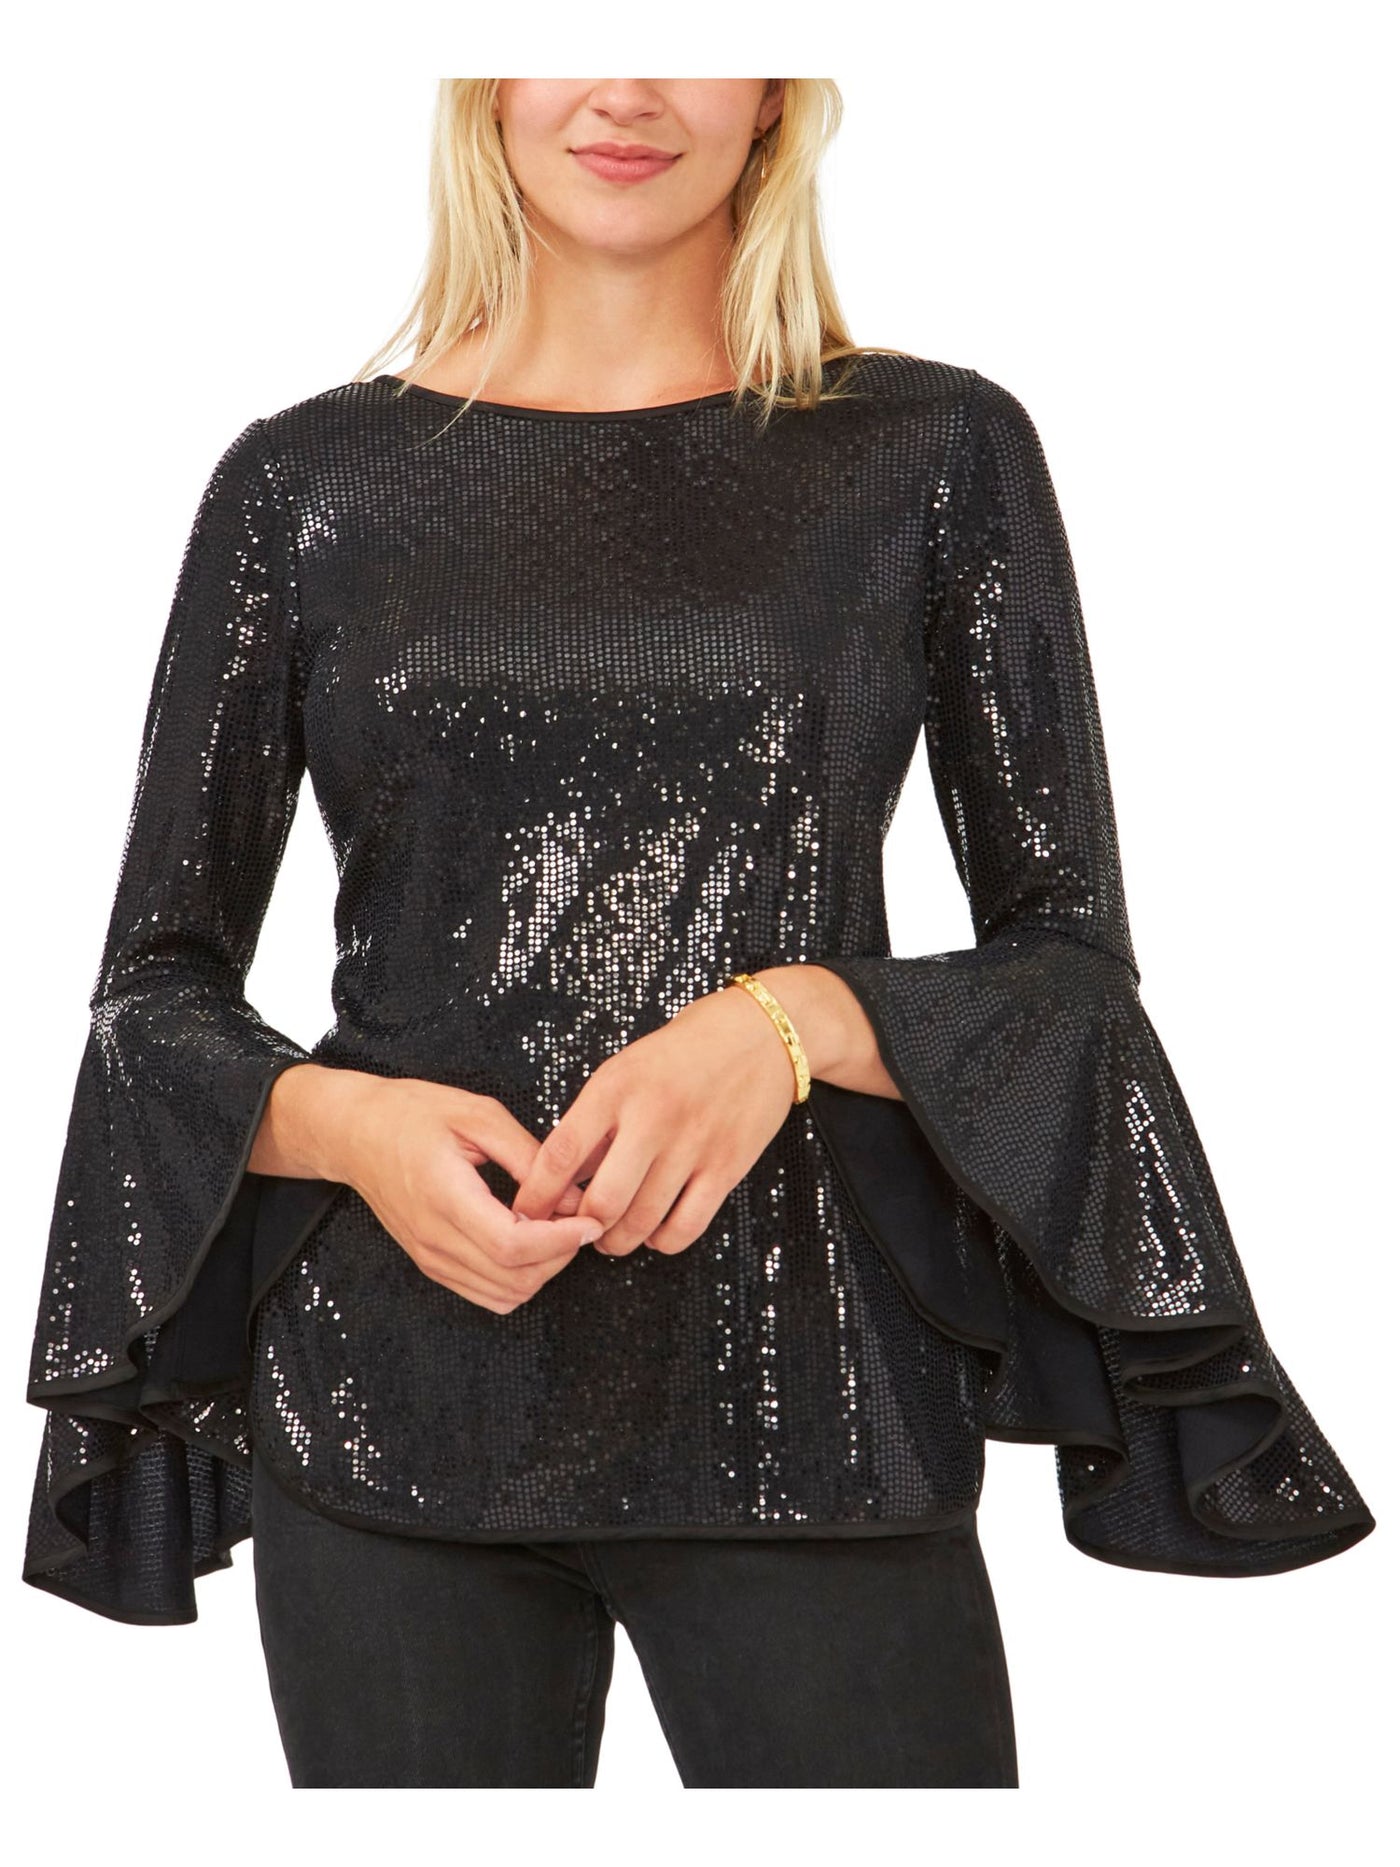 VINCE CAMUTO Womens Black Metallic Textured Sheer Unlined Flutter Sleeve Crew Neck Cocktail Top XS